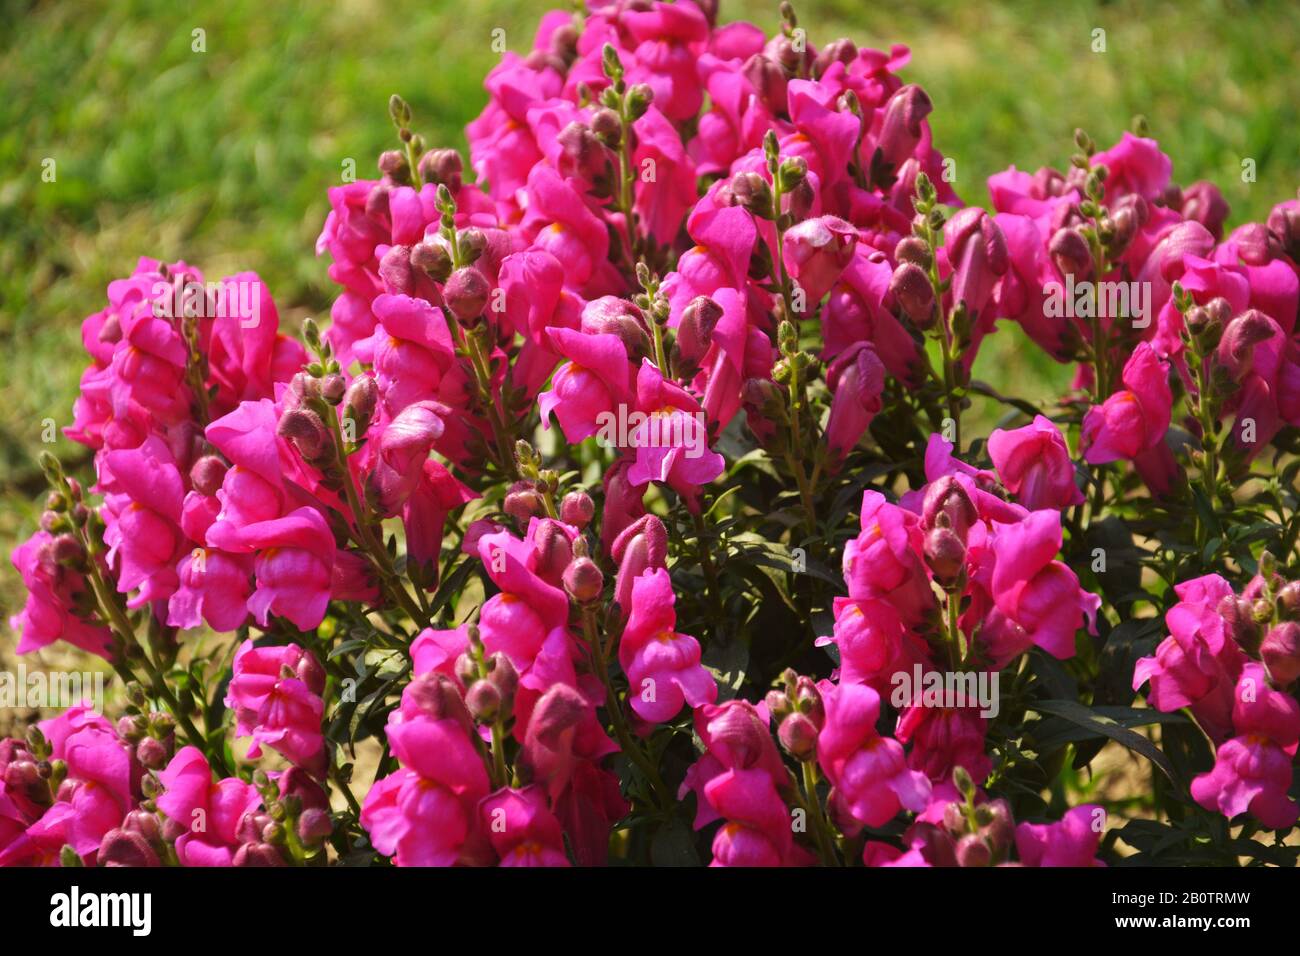 Close up of best annual flowers, antirrhinum majus,  flowers, commom snapdragon flowering plants growing in garden, selective focusing Stock Photo